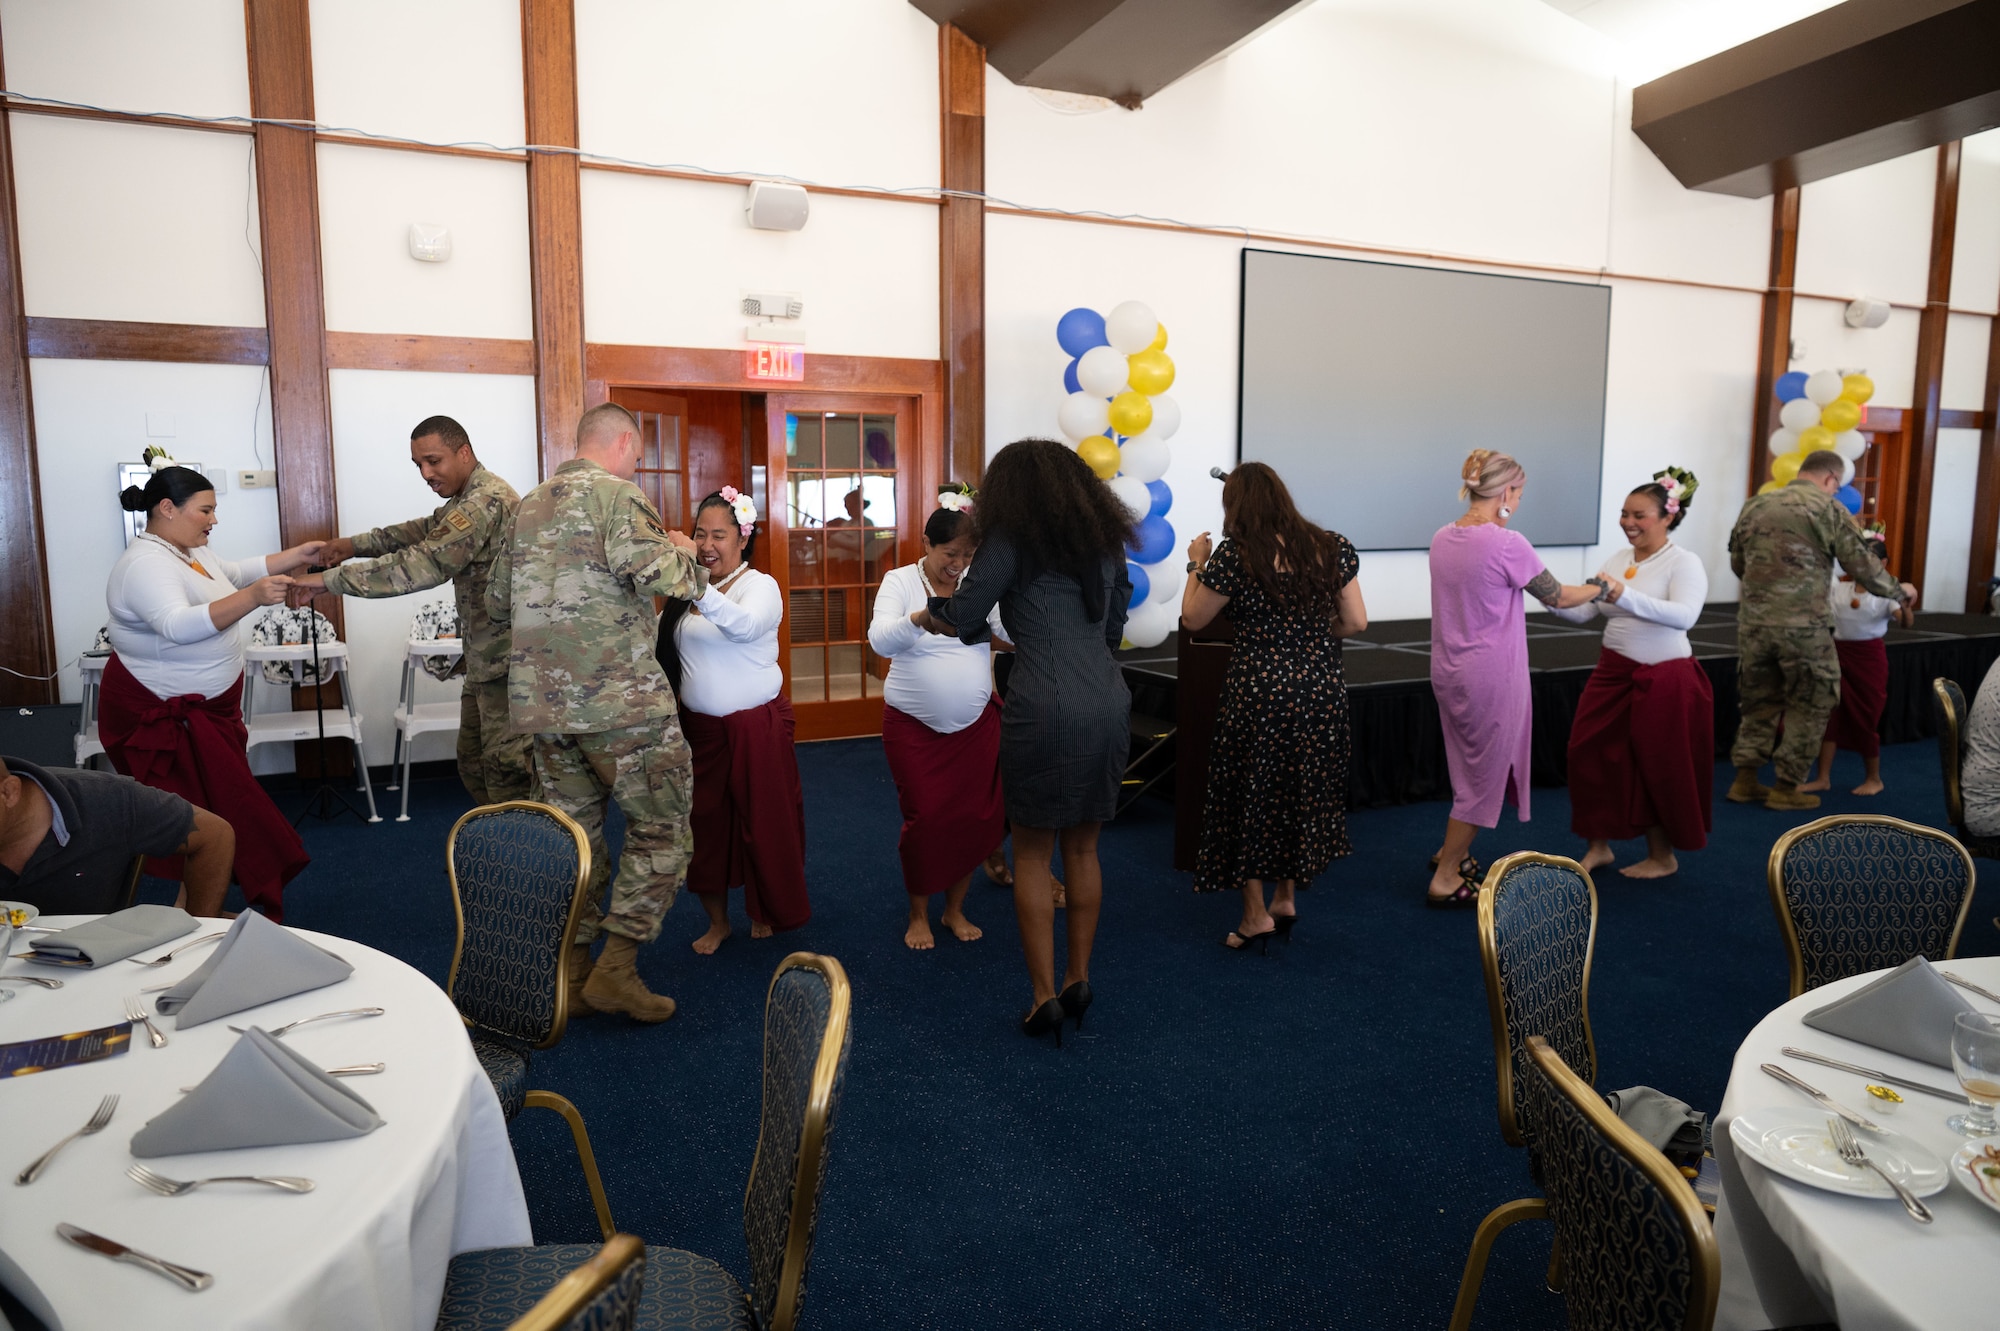 The purpose of the event was to recognize the volunteers for their dedication to the chapel as well as celebrate the Chaplain Corps 75th anniversary. (U.S. Air Force photo by Airman 1st Class Audree Campbell)